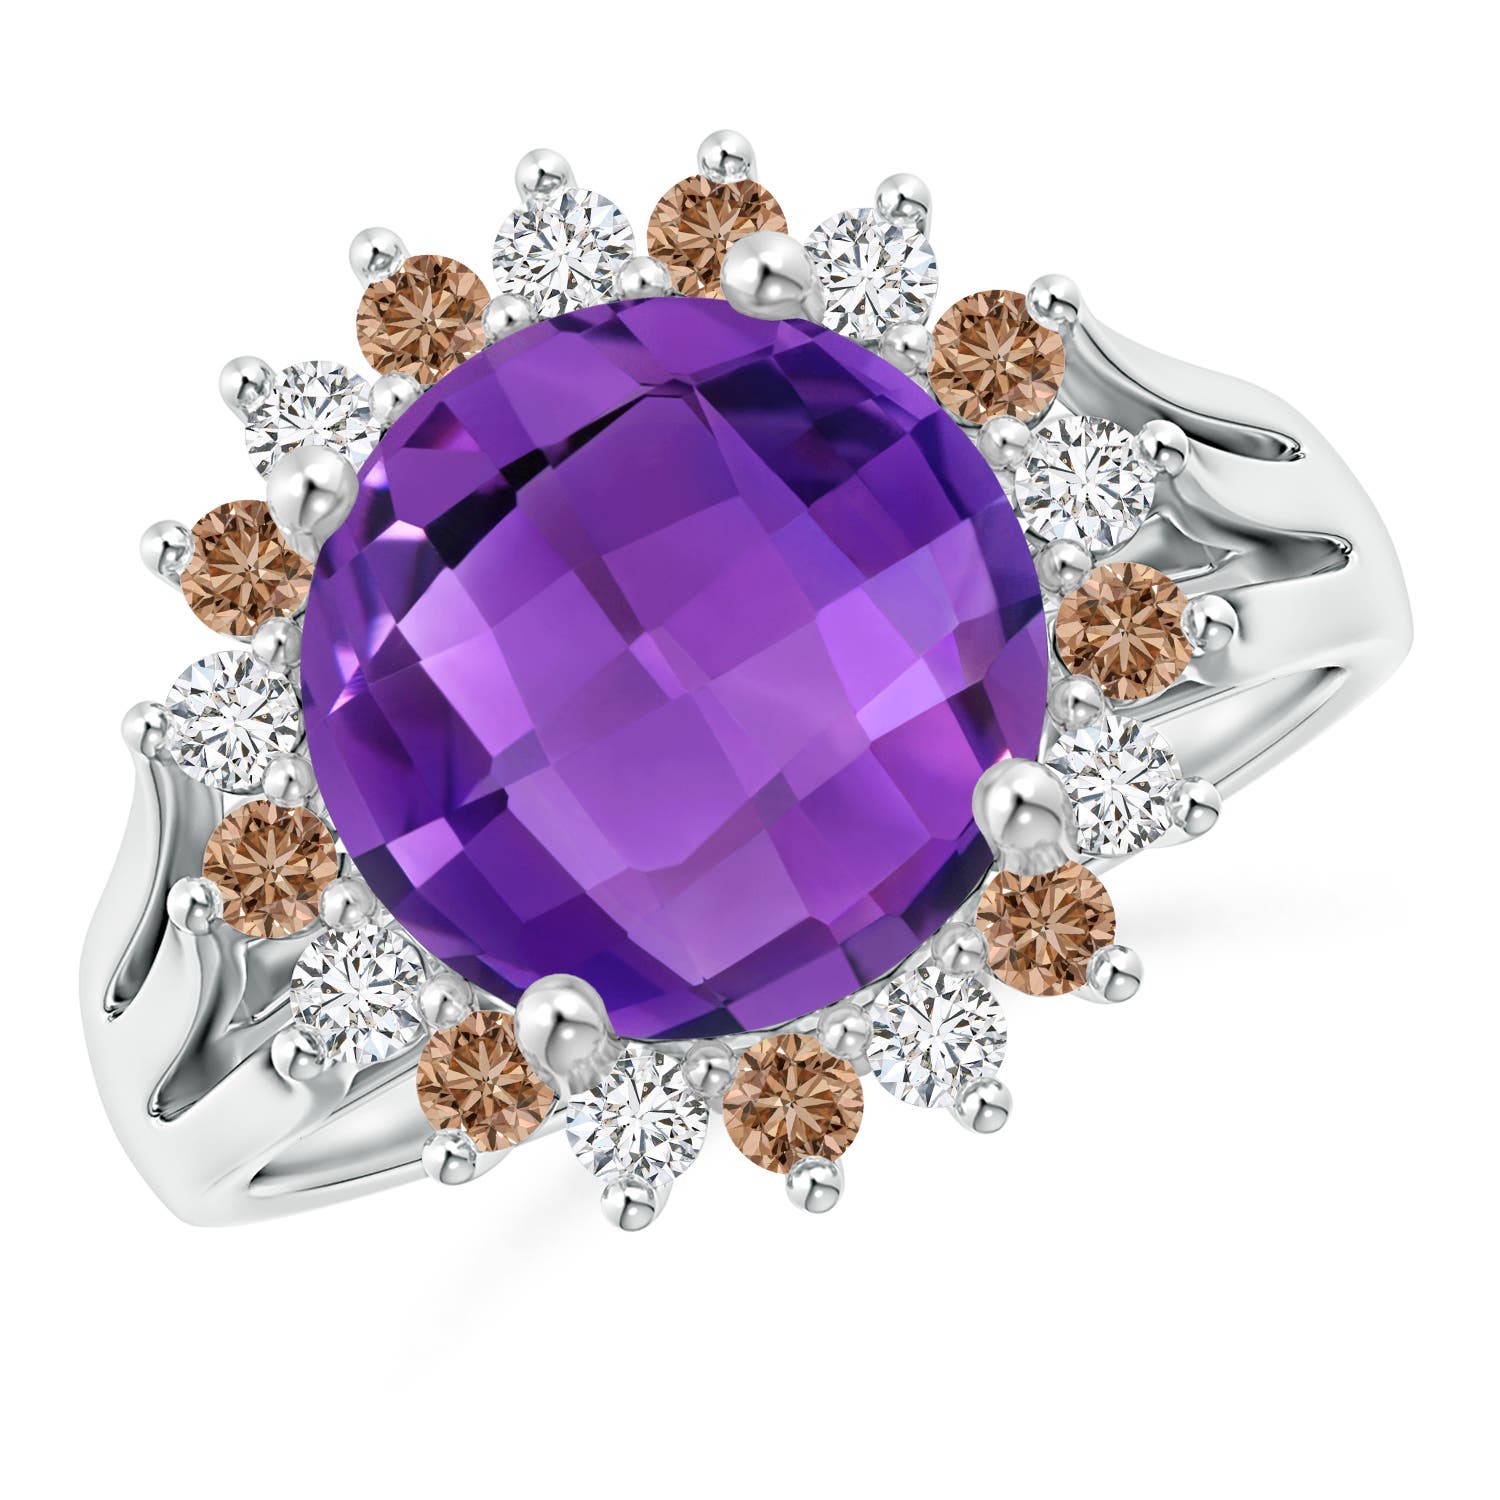 AAA - Amethyst / 4.17 CT / 14 KT White Gold